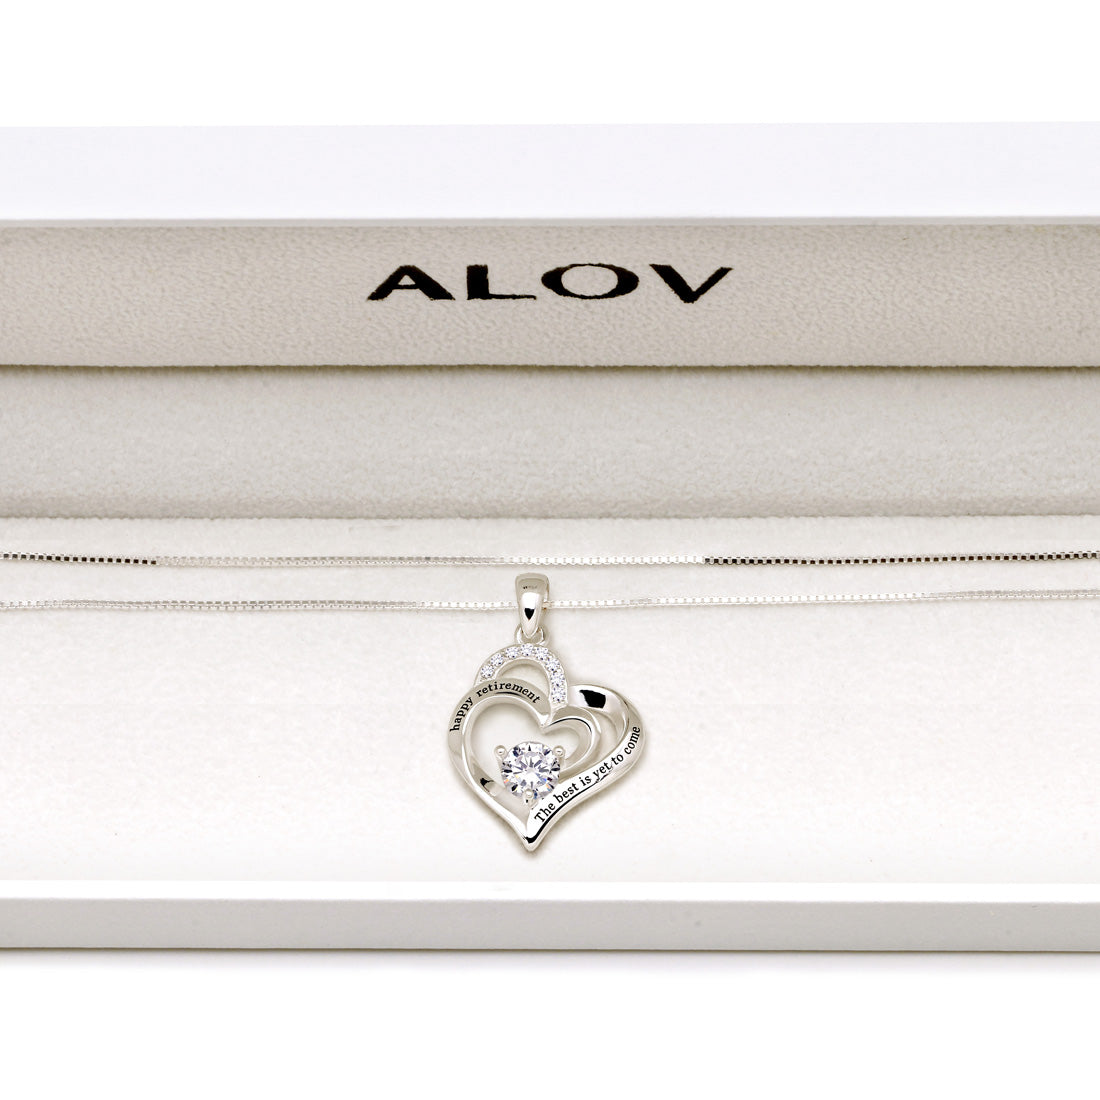 ALOV Jewelry Sterling Silver happy retirement the best is yet to come Love Heart Cubic Zirconia Pendant Necklace